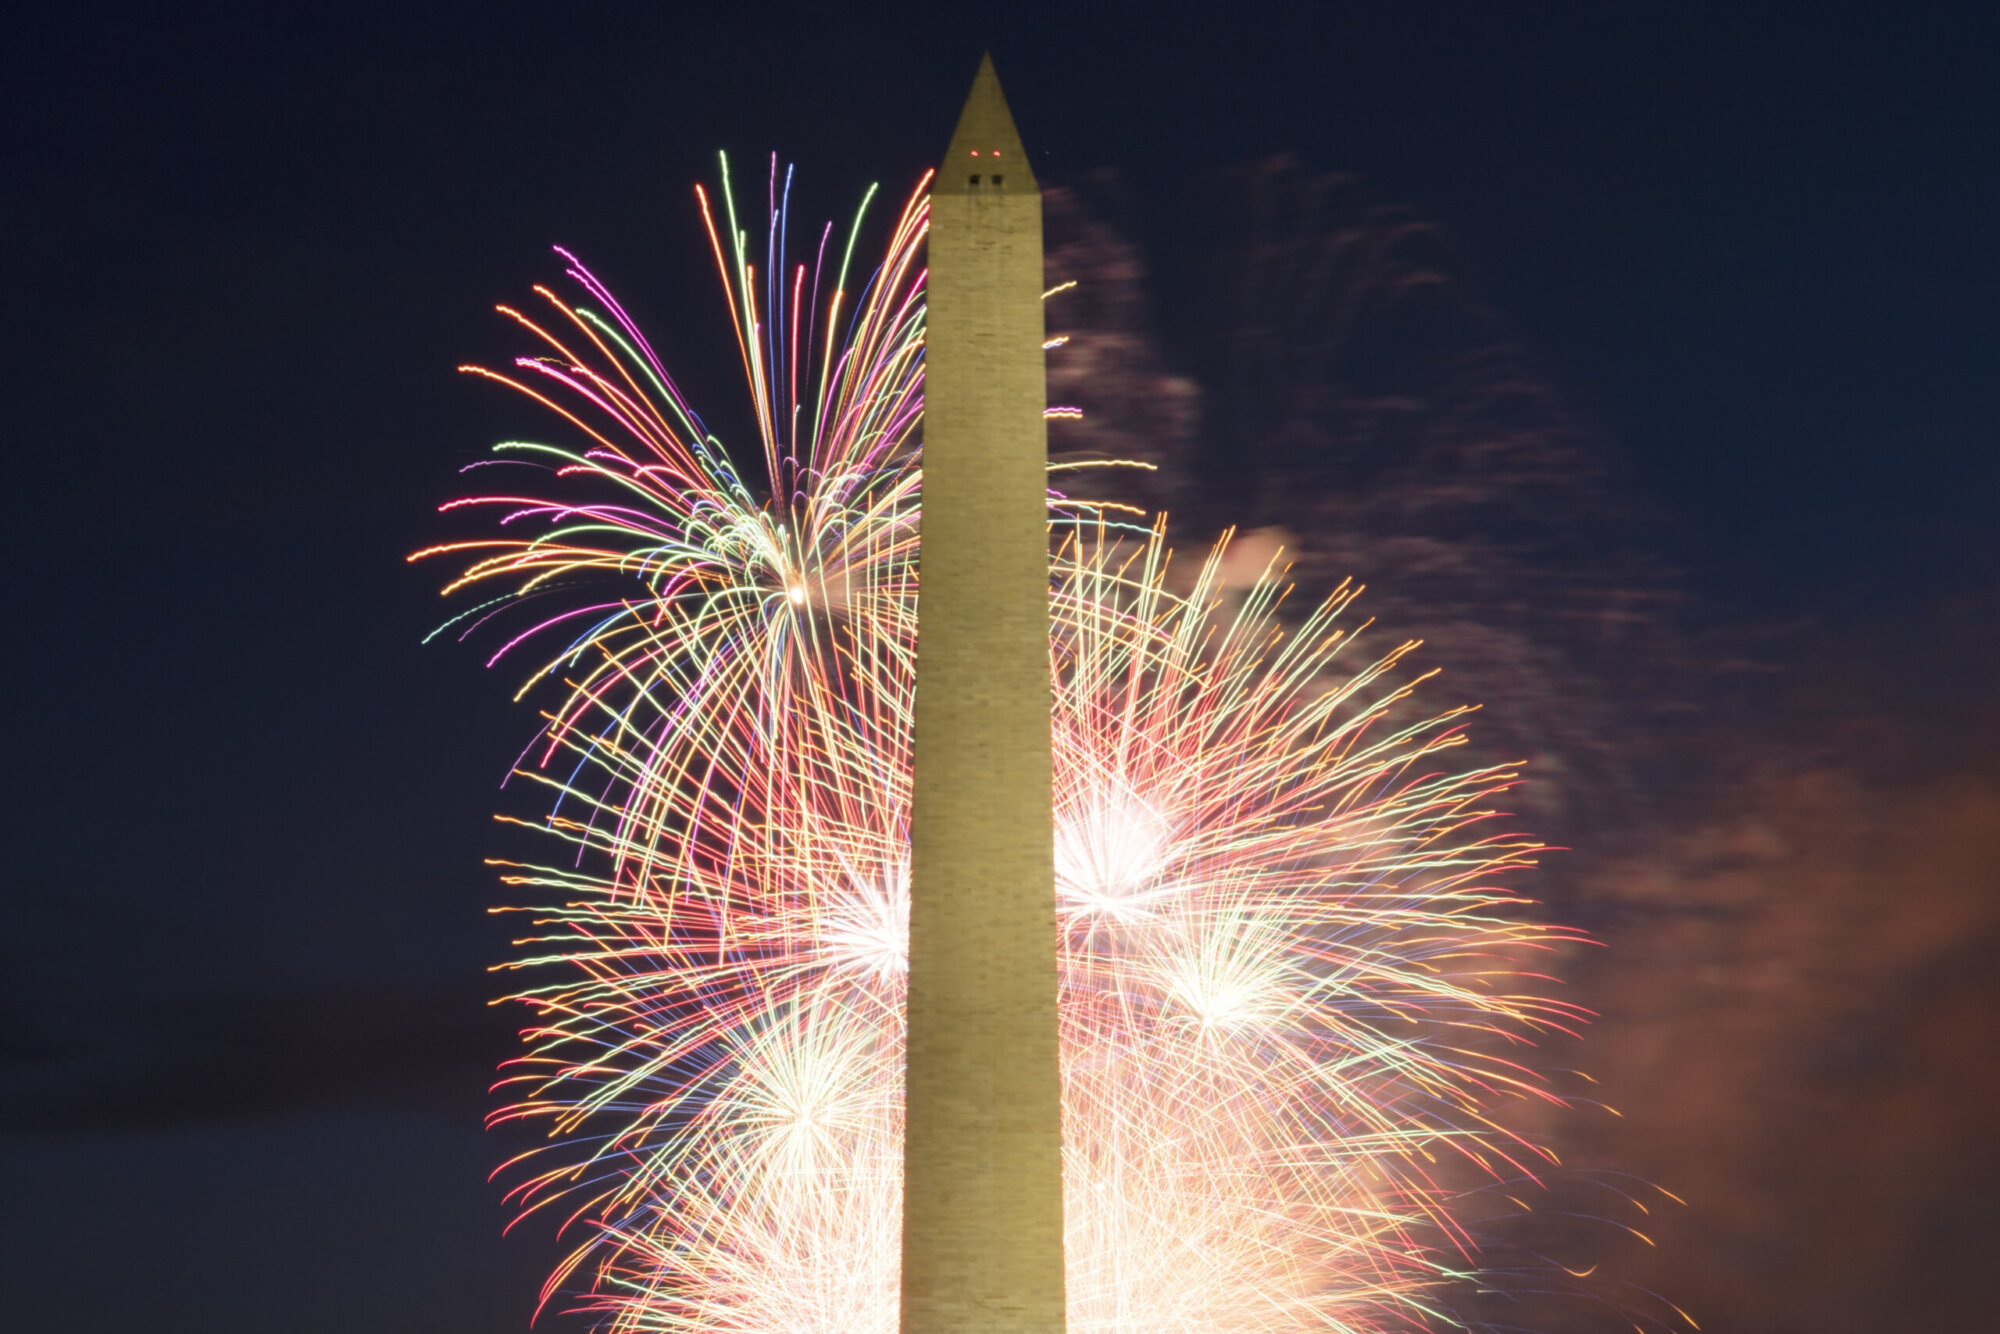 PHOTOS Thousands gather at National Mall for July Fourth fireworks